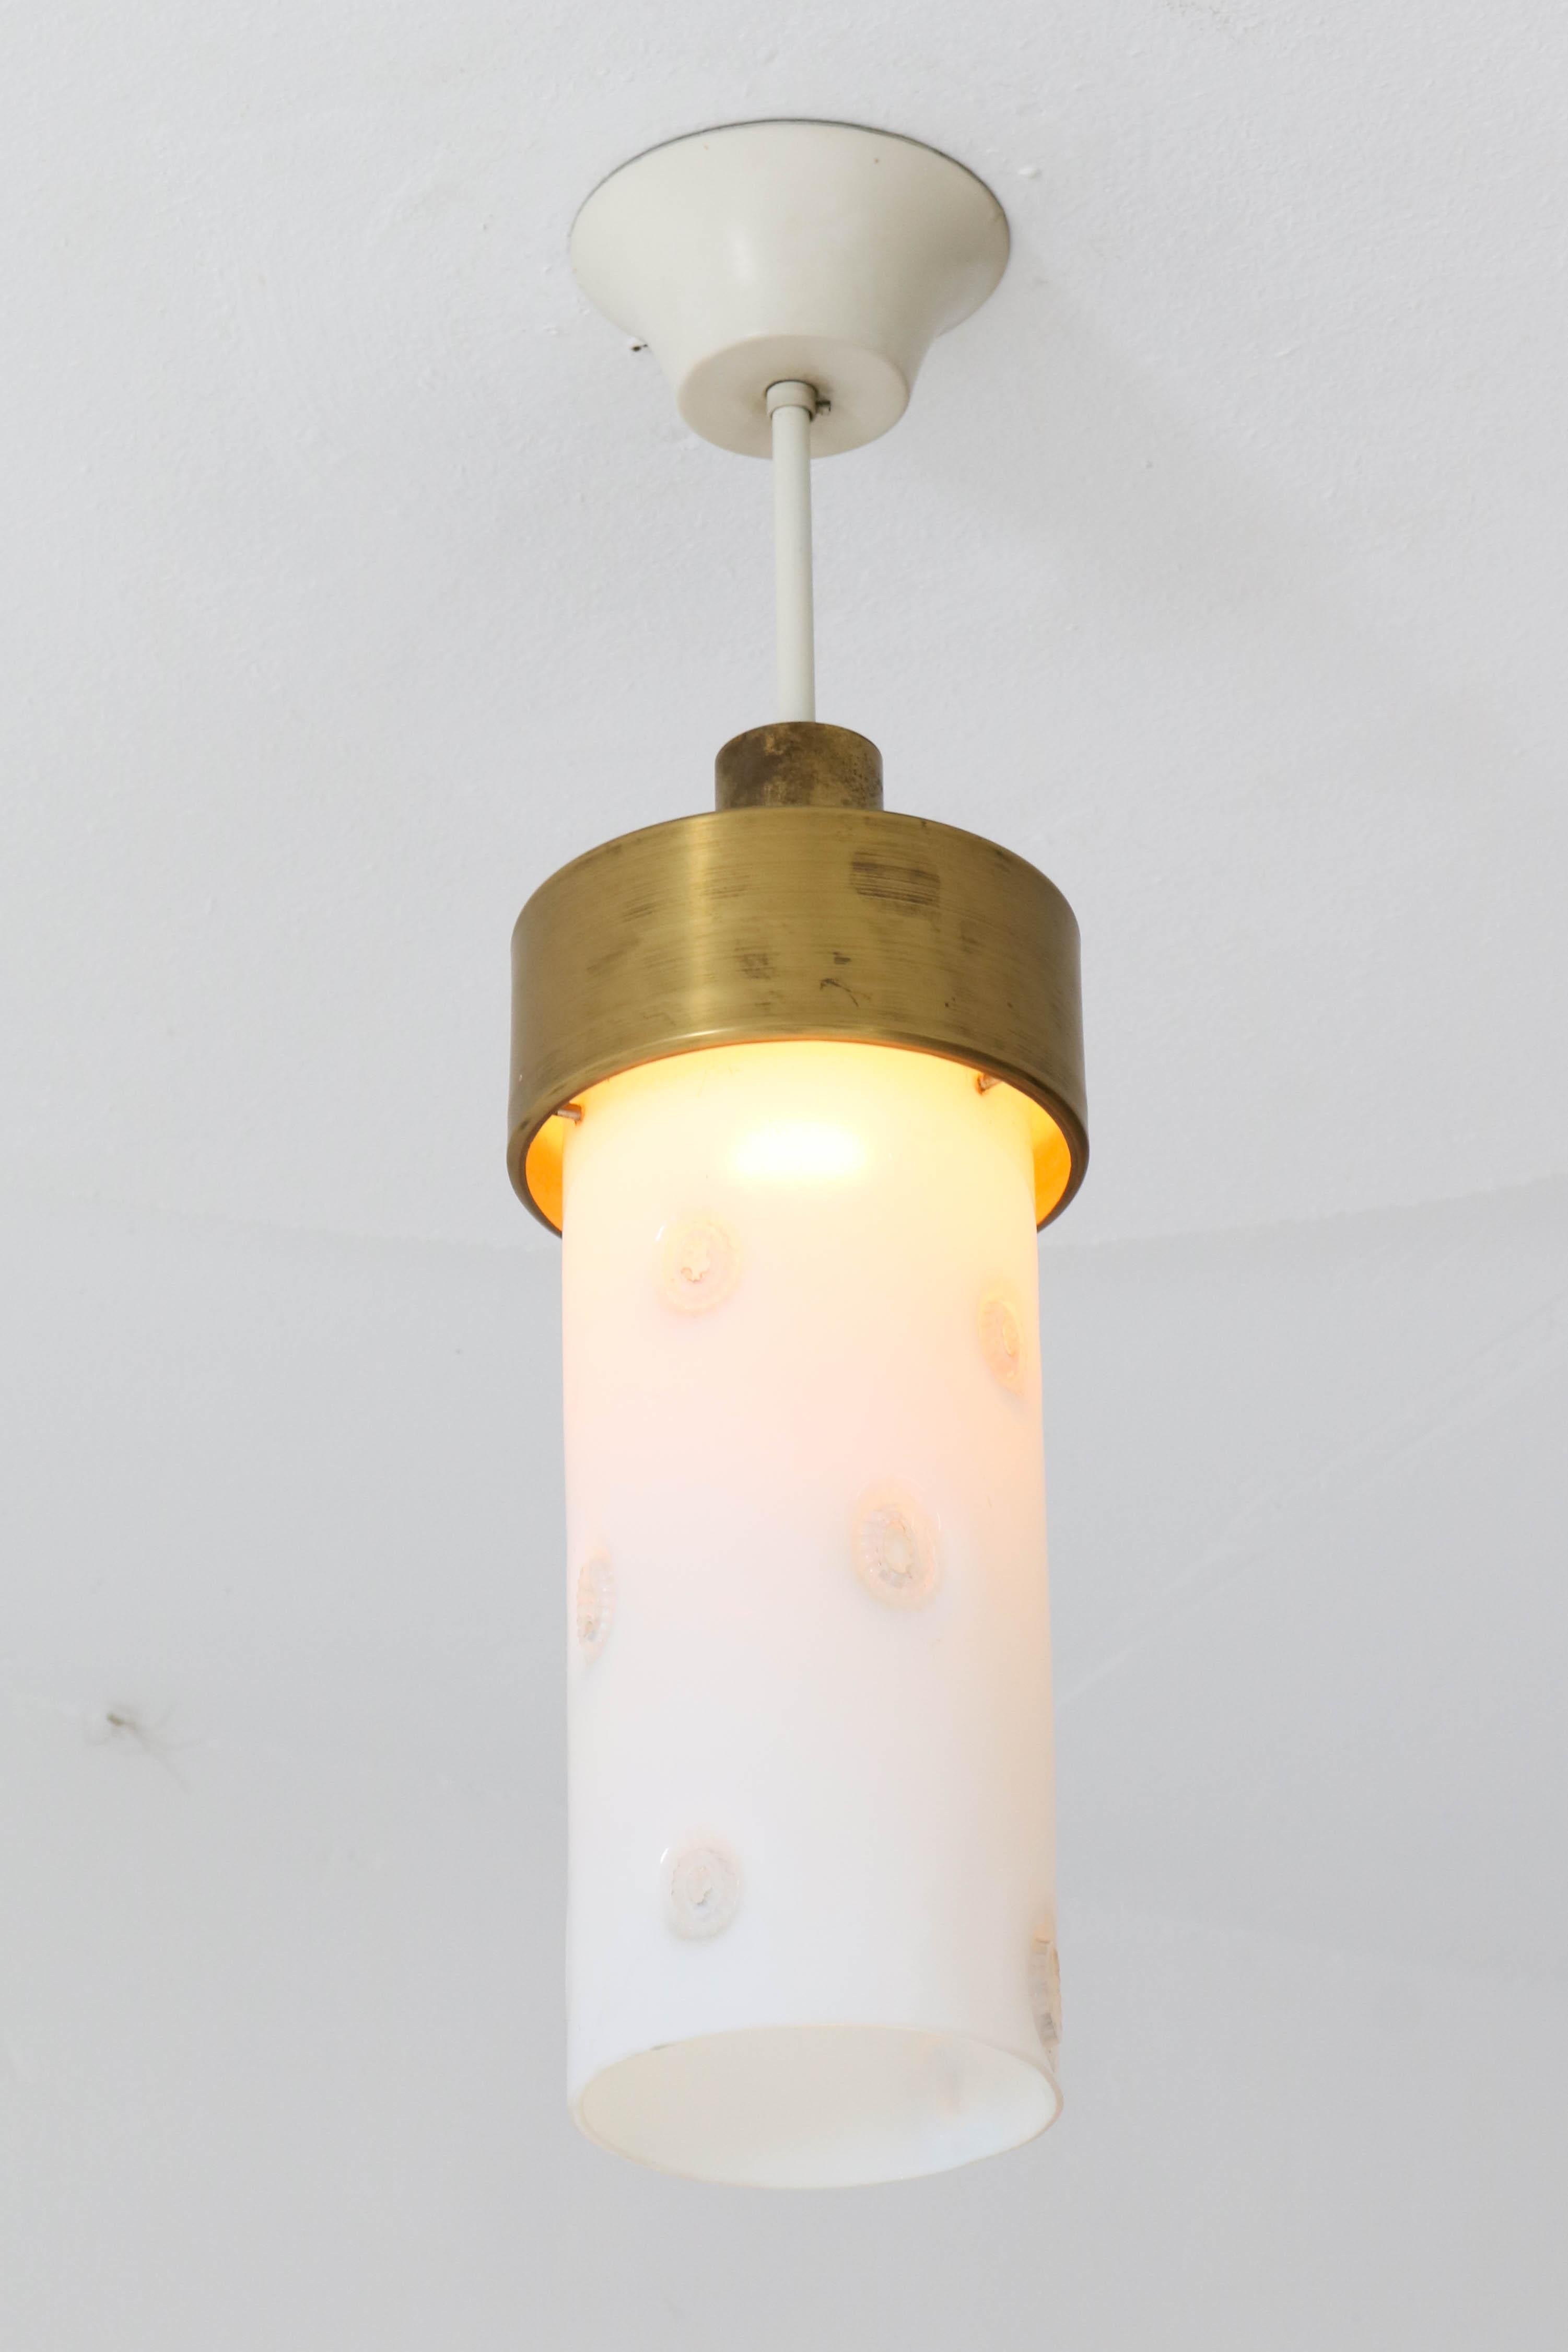 Stunning and rare Mid-Century Modern pendant light.
Striking Italian design from the 1960s.
Bronze and metal pendant with original Murano glass shade.
Please note that we have five pendants in stock.
All five pendants are in very good condition,